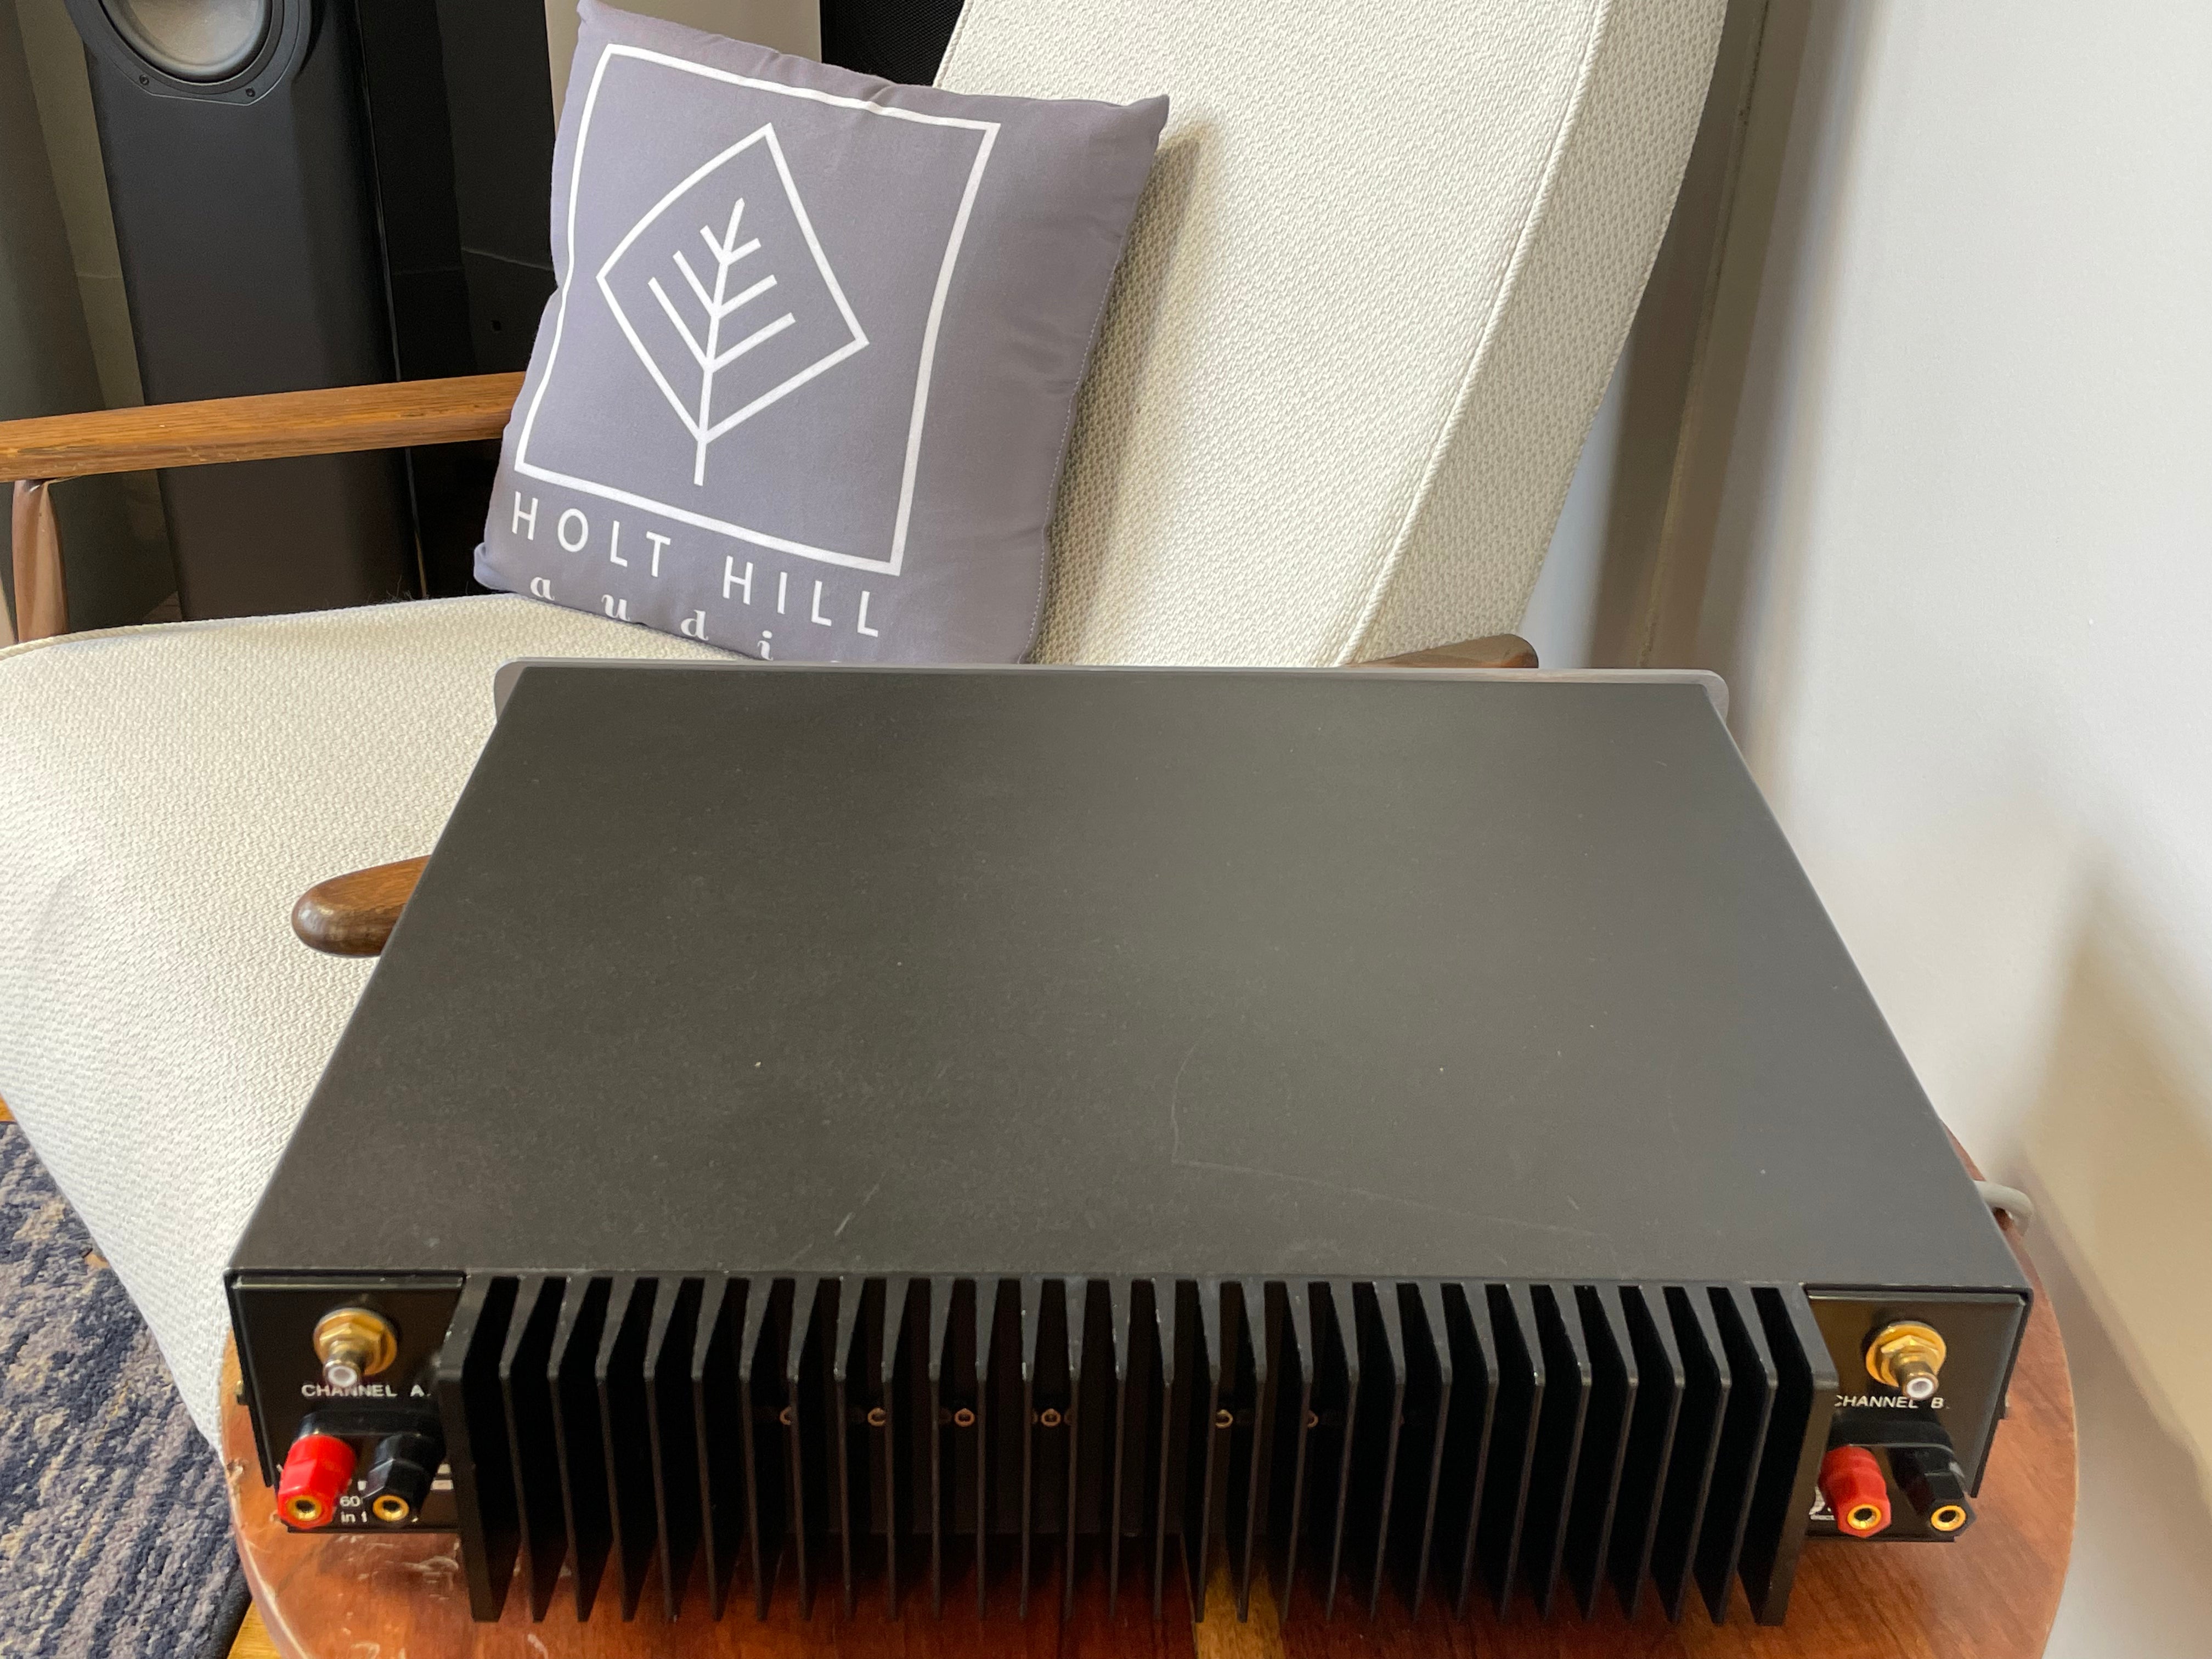 YBA 3 Power Amplifier - Classic French HiEnd